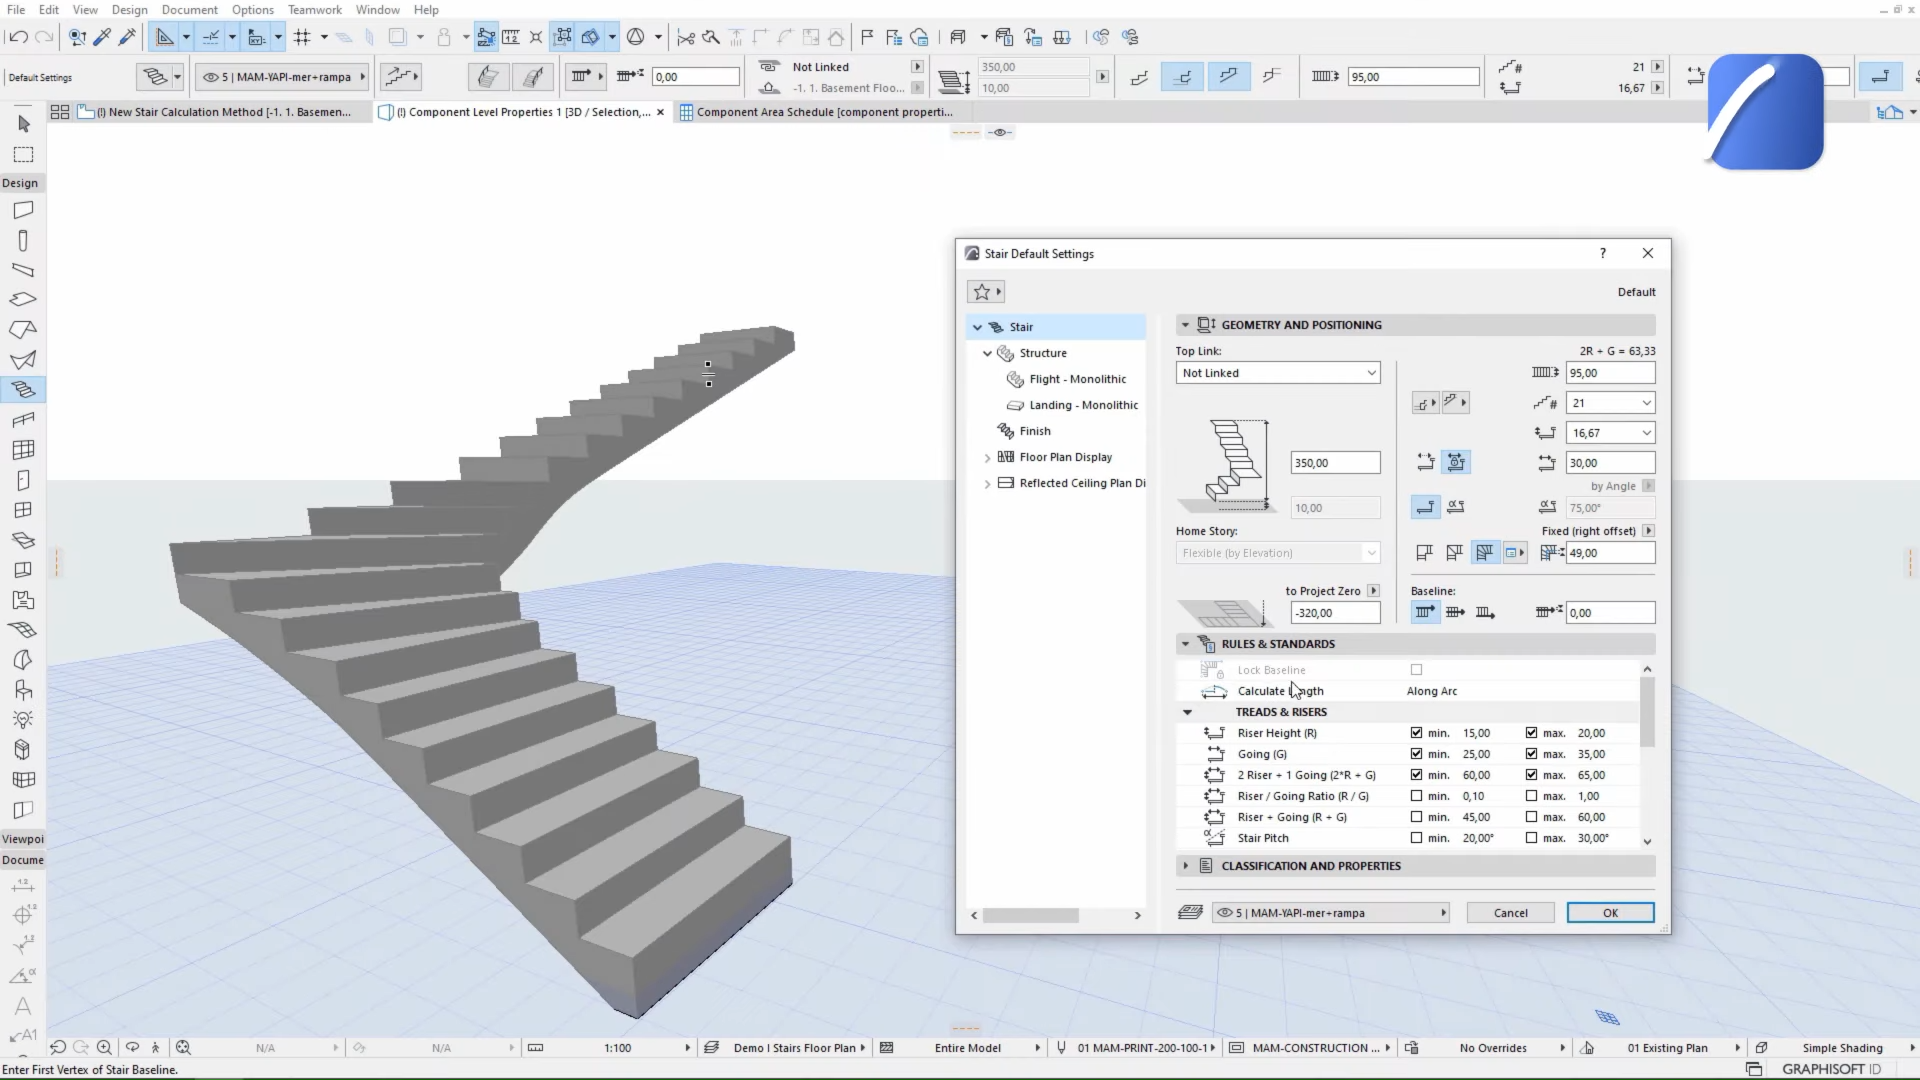 archicad stairs free download